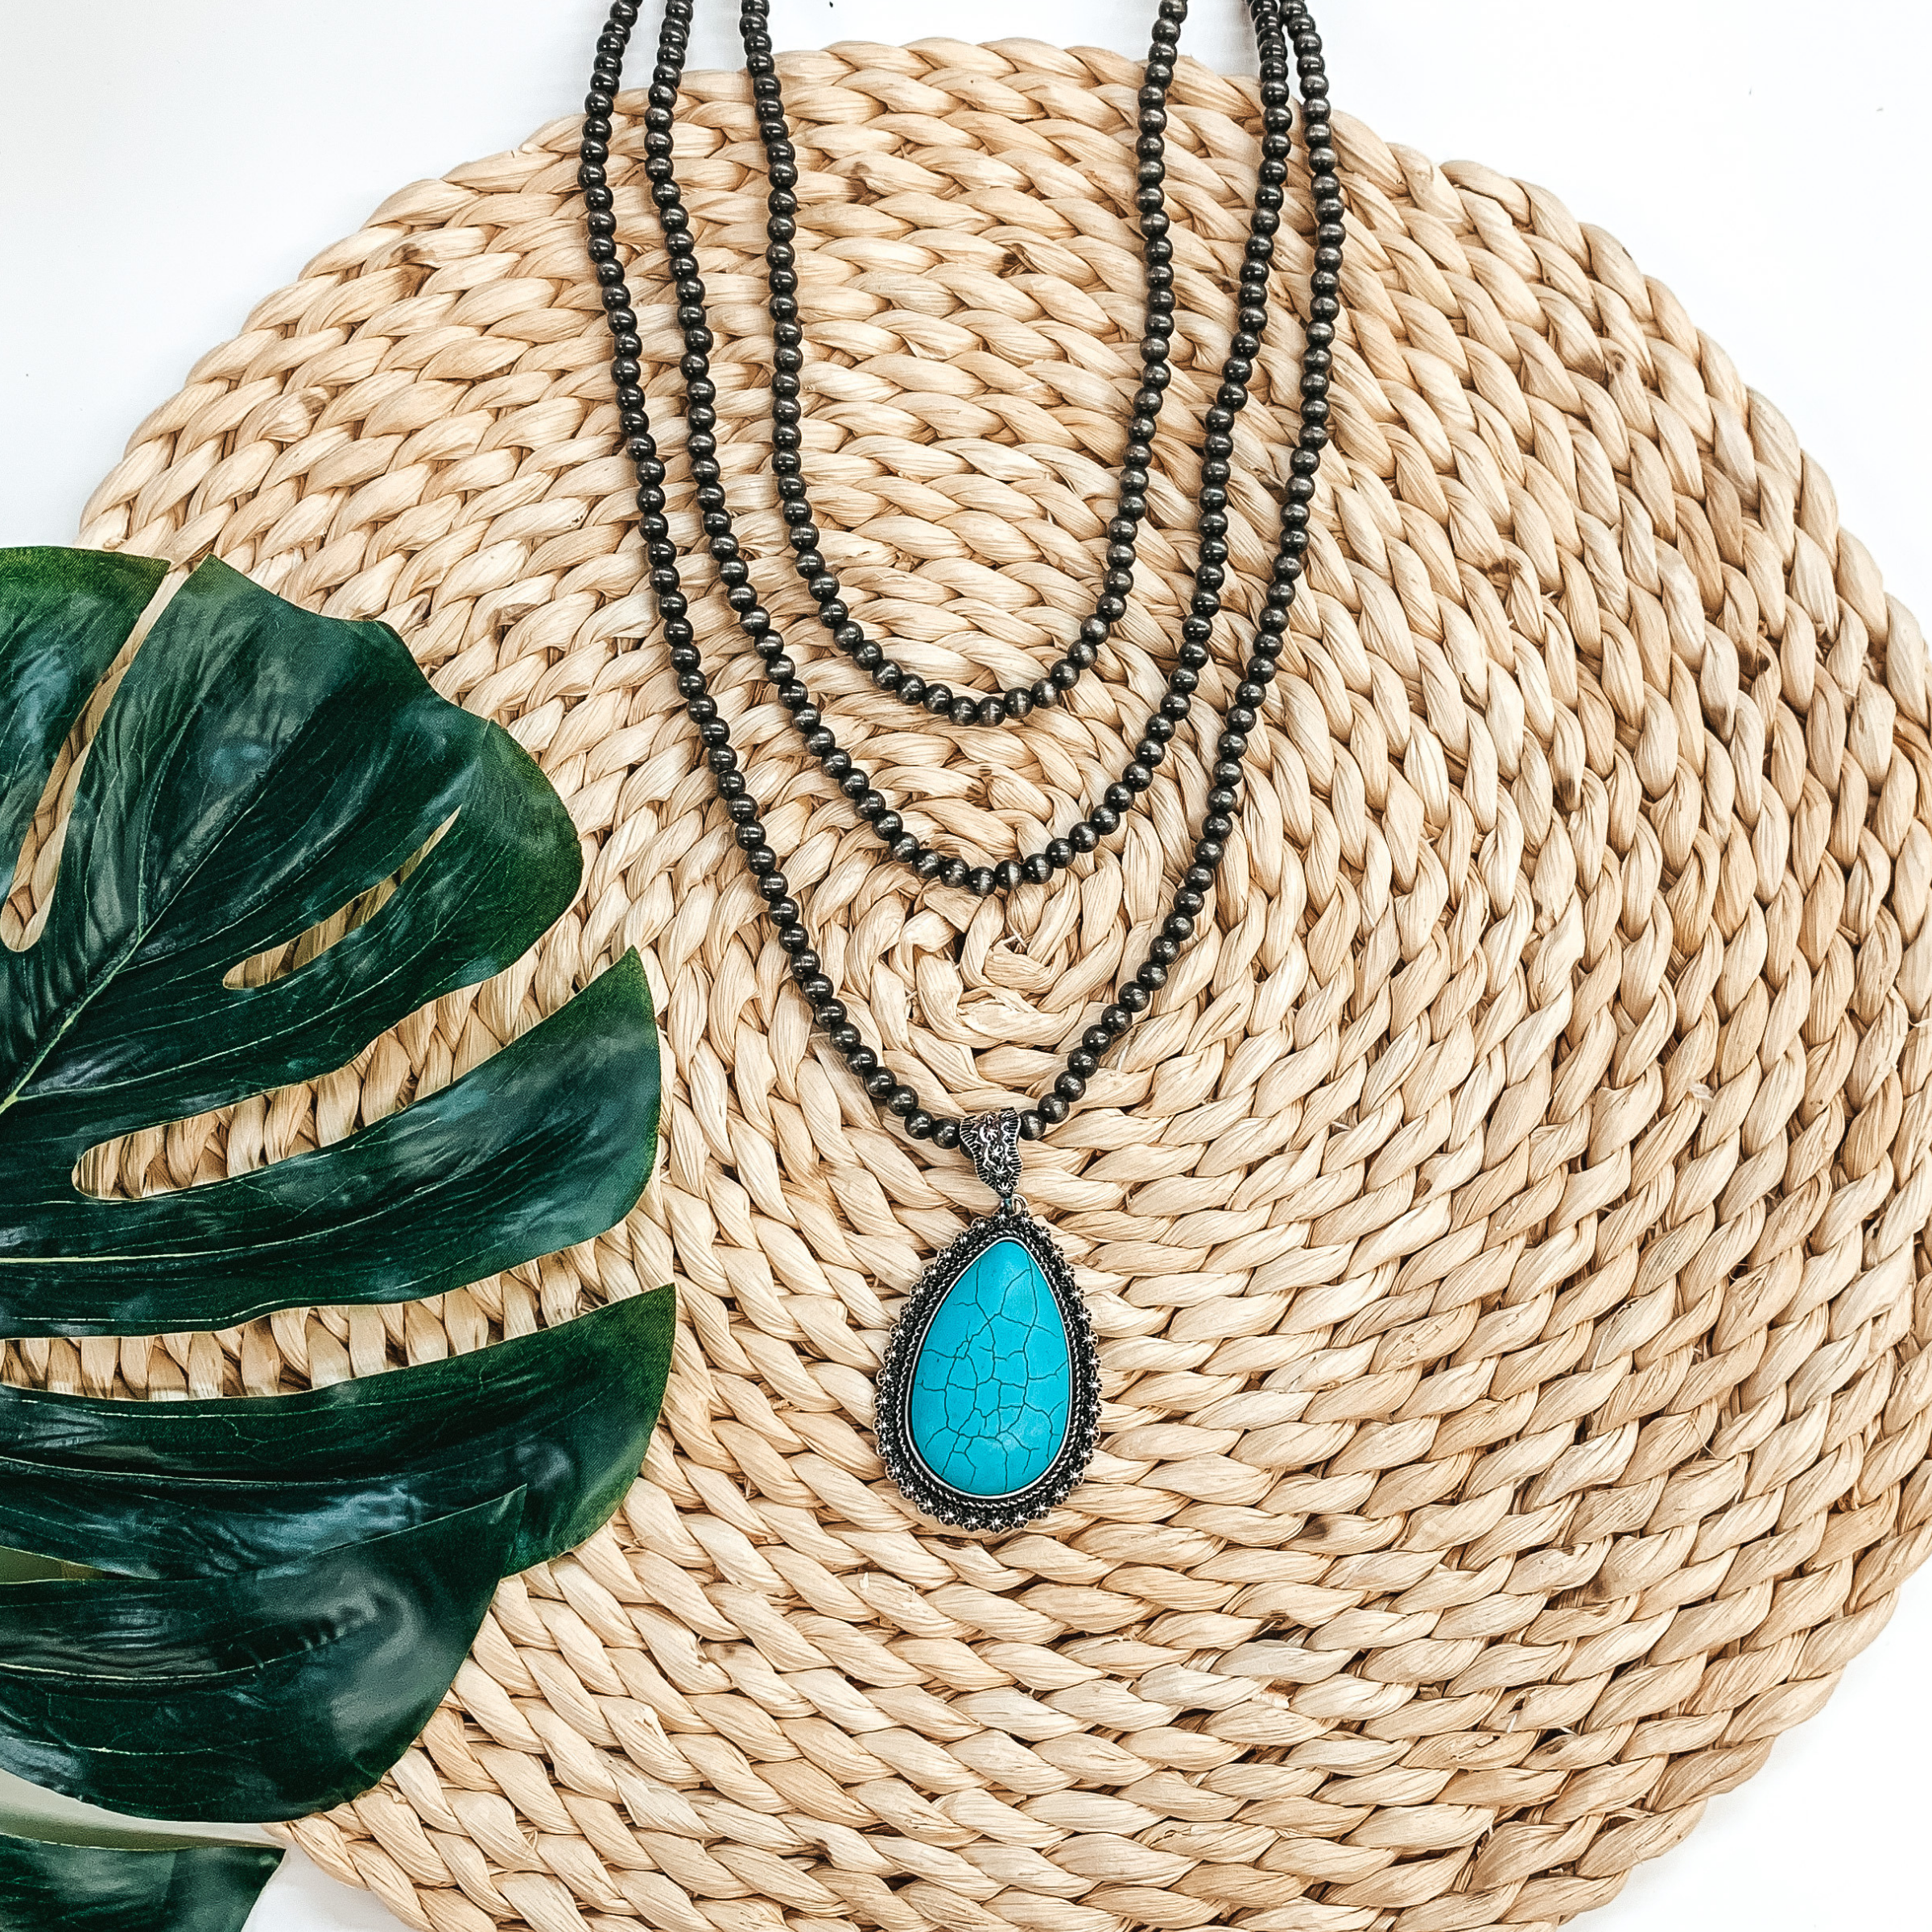 Navajo Pearl Inspired Layering Necklace in Silver Tone with Turquoise Teardrop Stone - Giddy Up Glamour Boutique